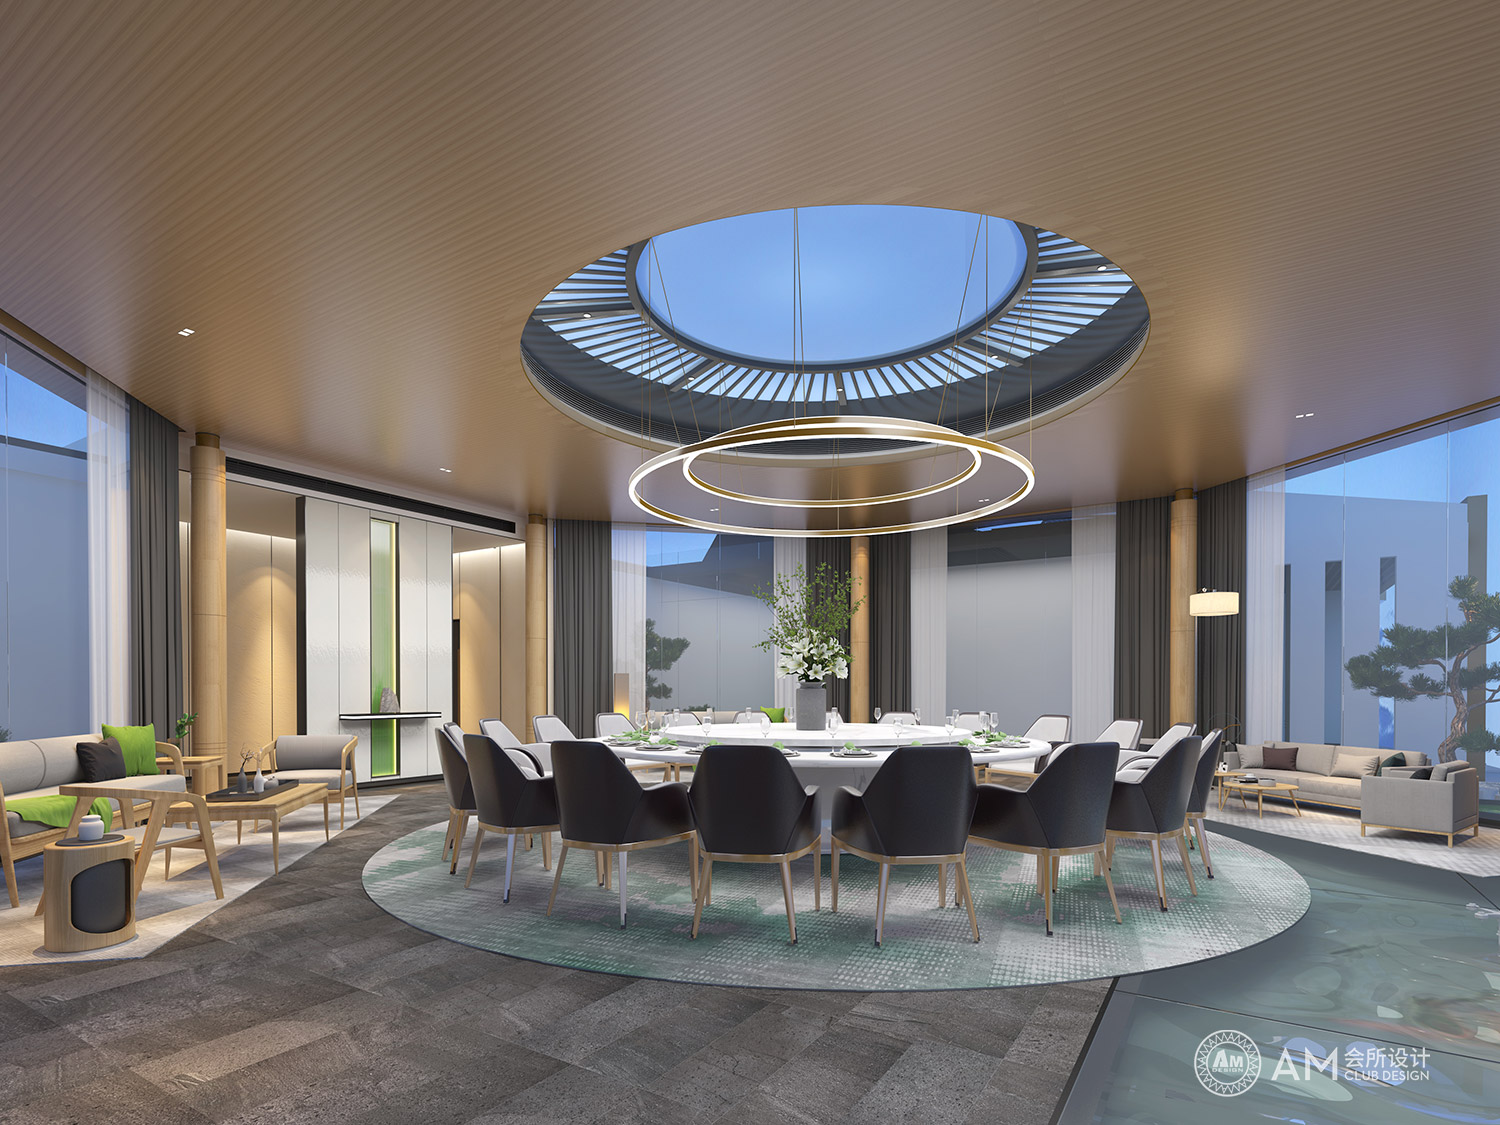 AM DESIGN | Restaurant Design of enterprise club in Aobei science and Technology Park